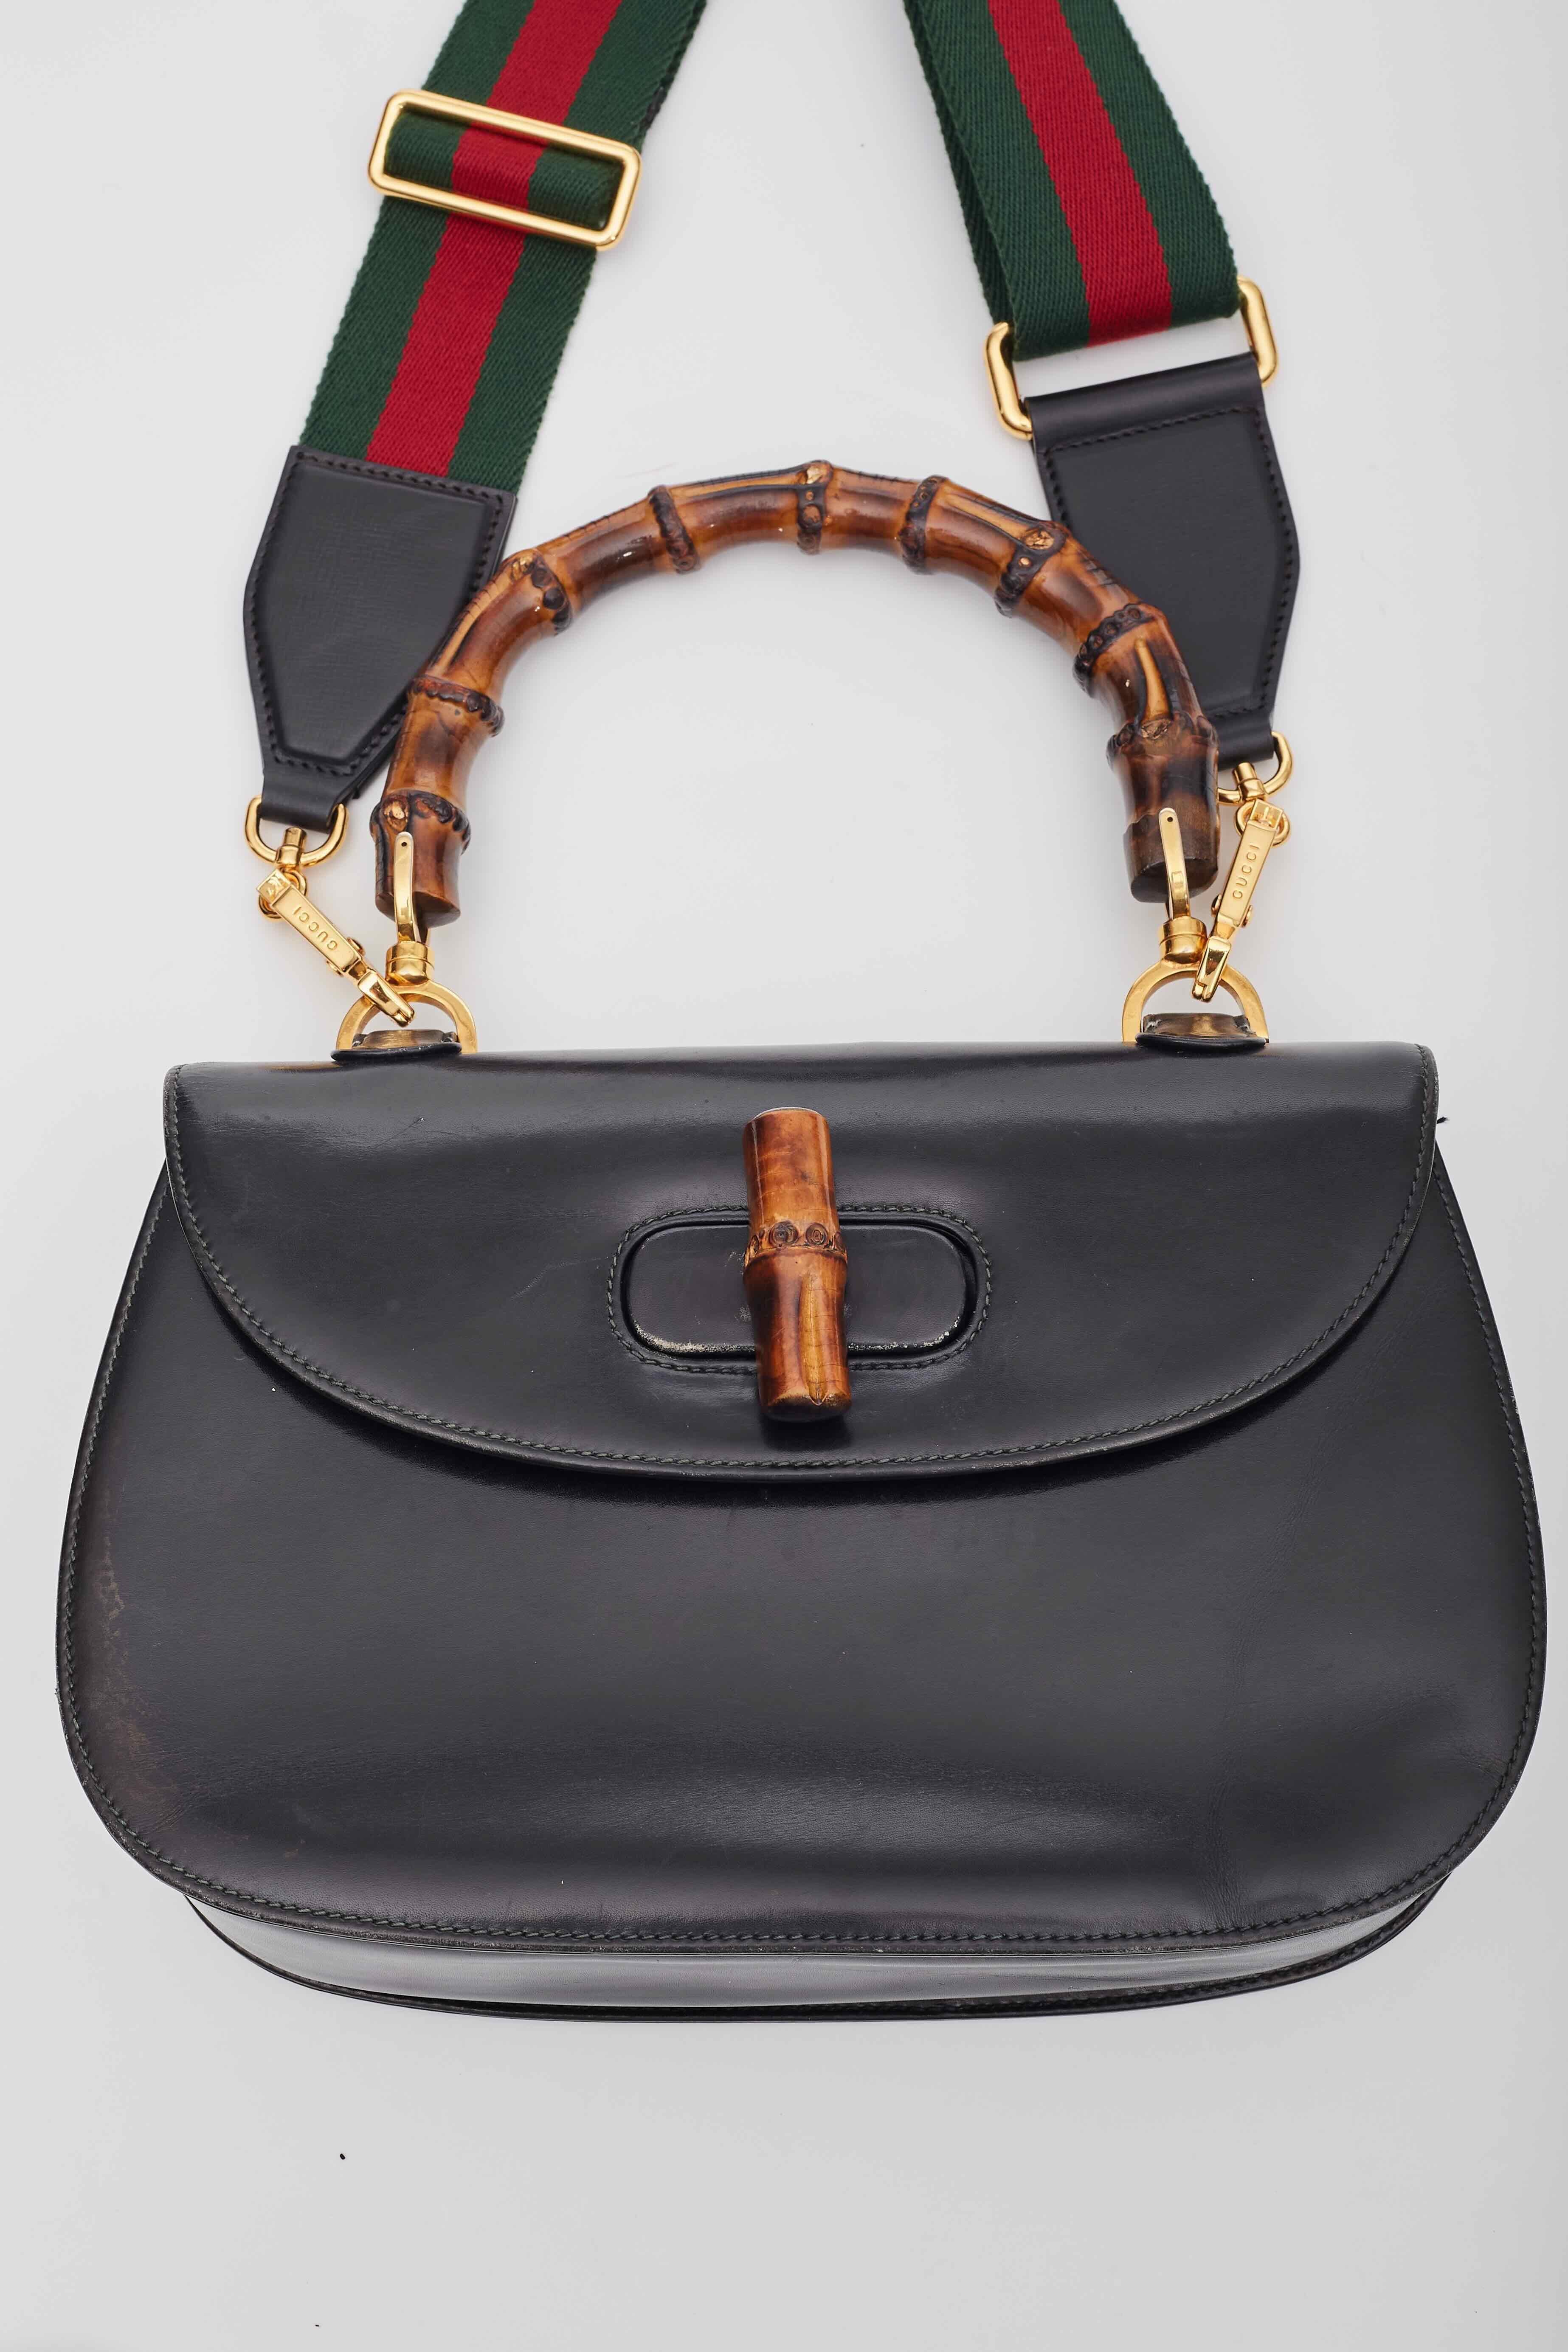 Gucci Vintage Bamboo 1947 Mini Top Handle Bag In Good Condition For Sale In Montreal, Quebec